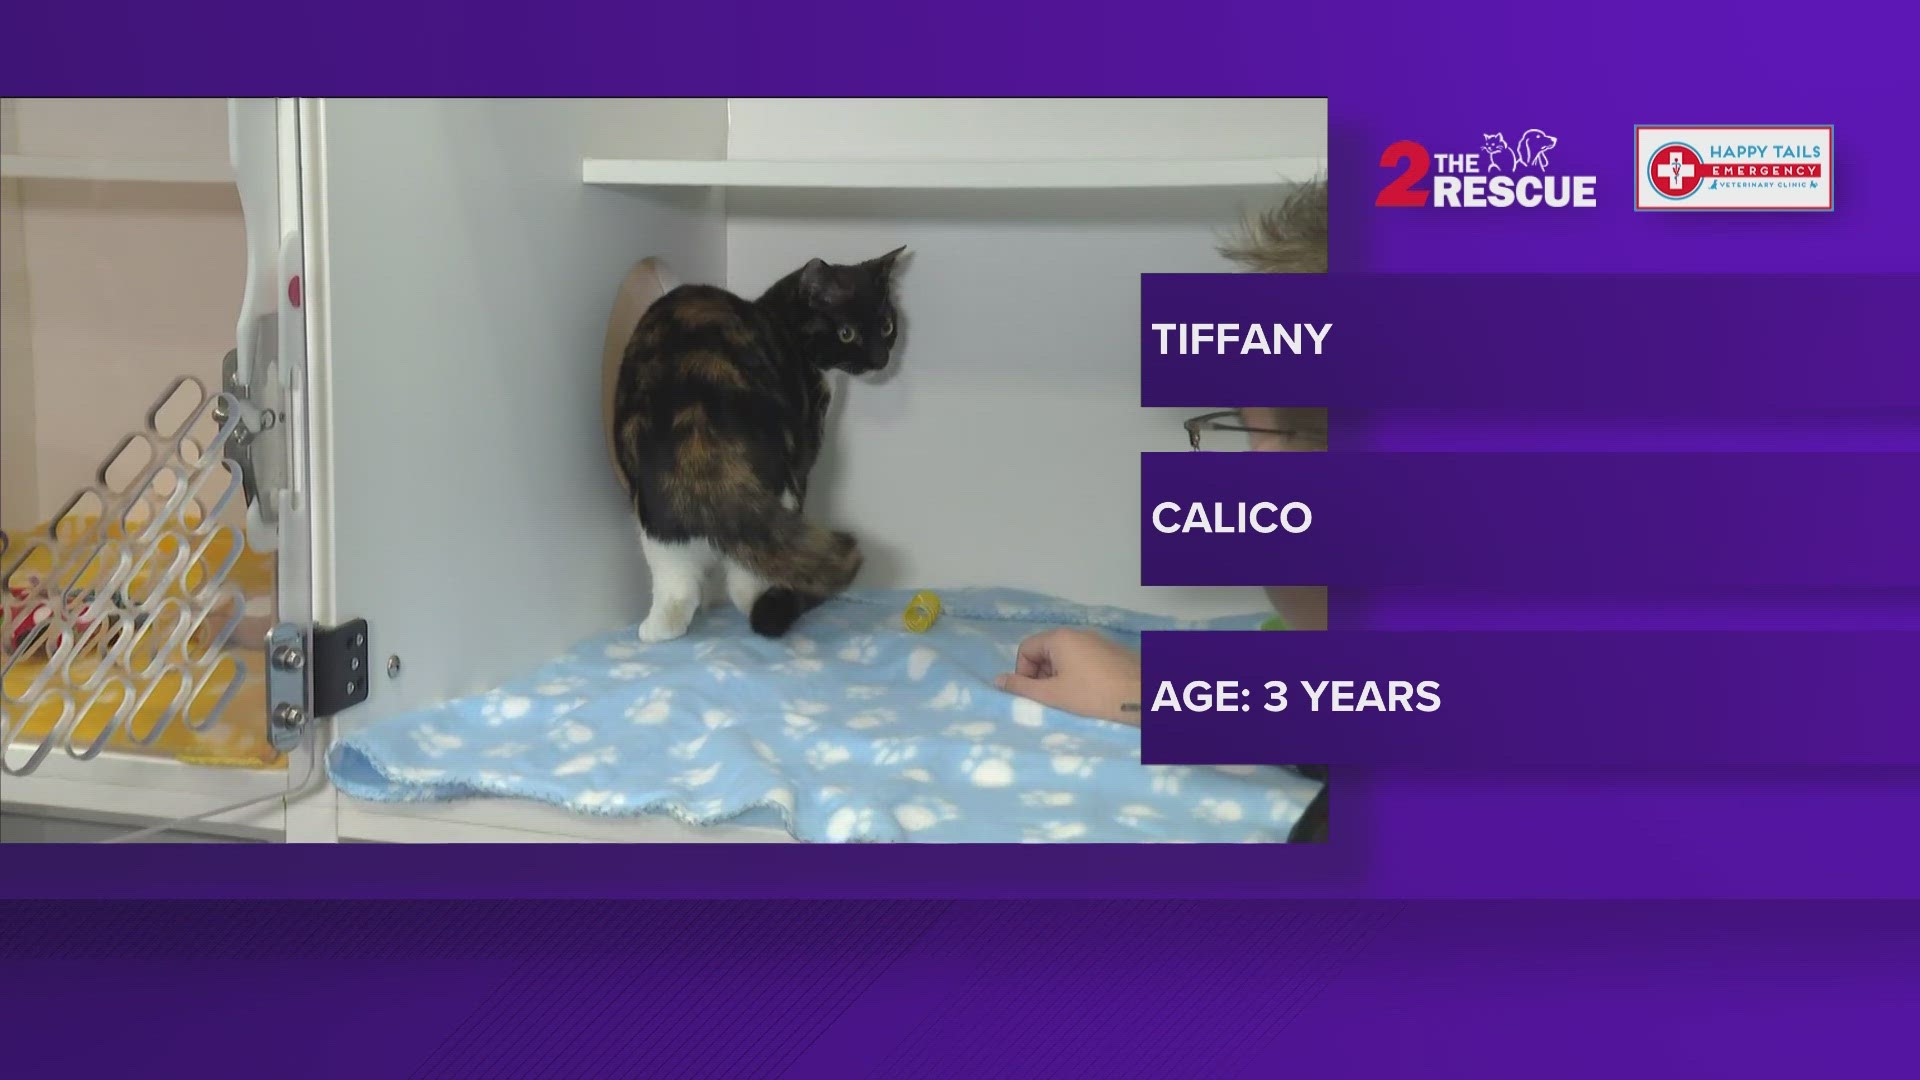 Tiffany is a three-year-old calico cat. Once she’s comfortable with you, she will roll onto her back for pets and purrs.